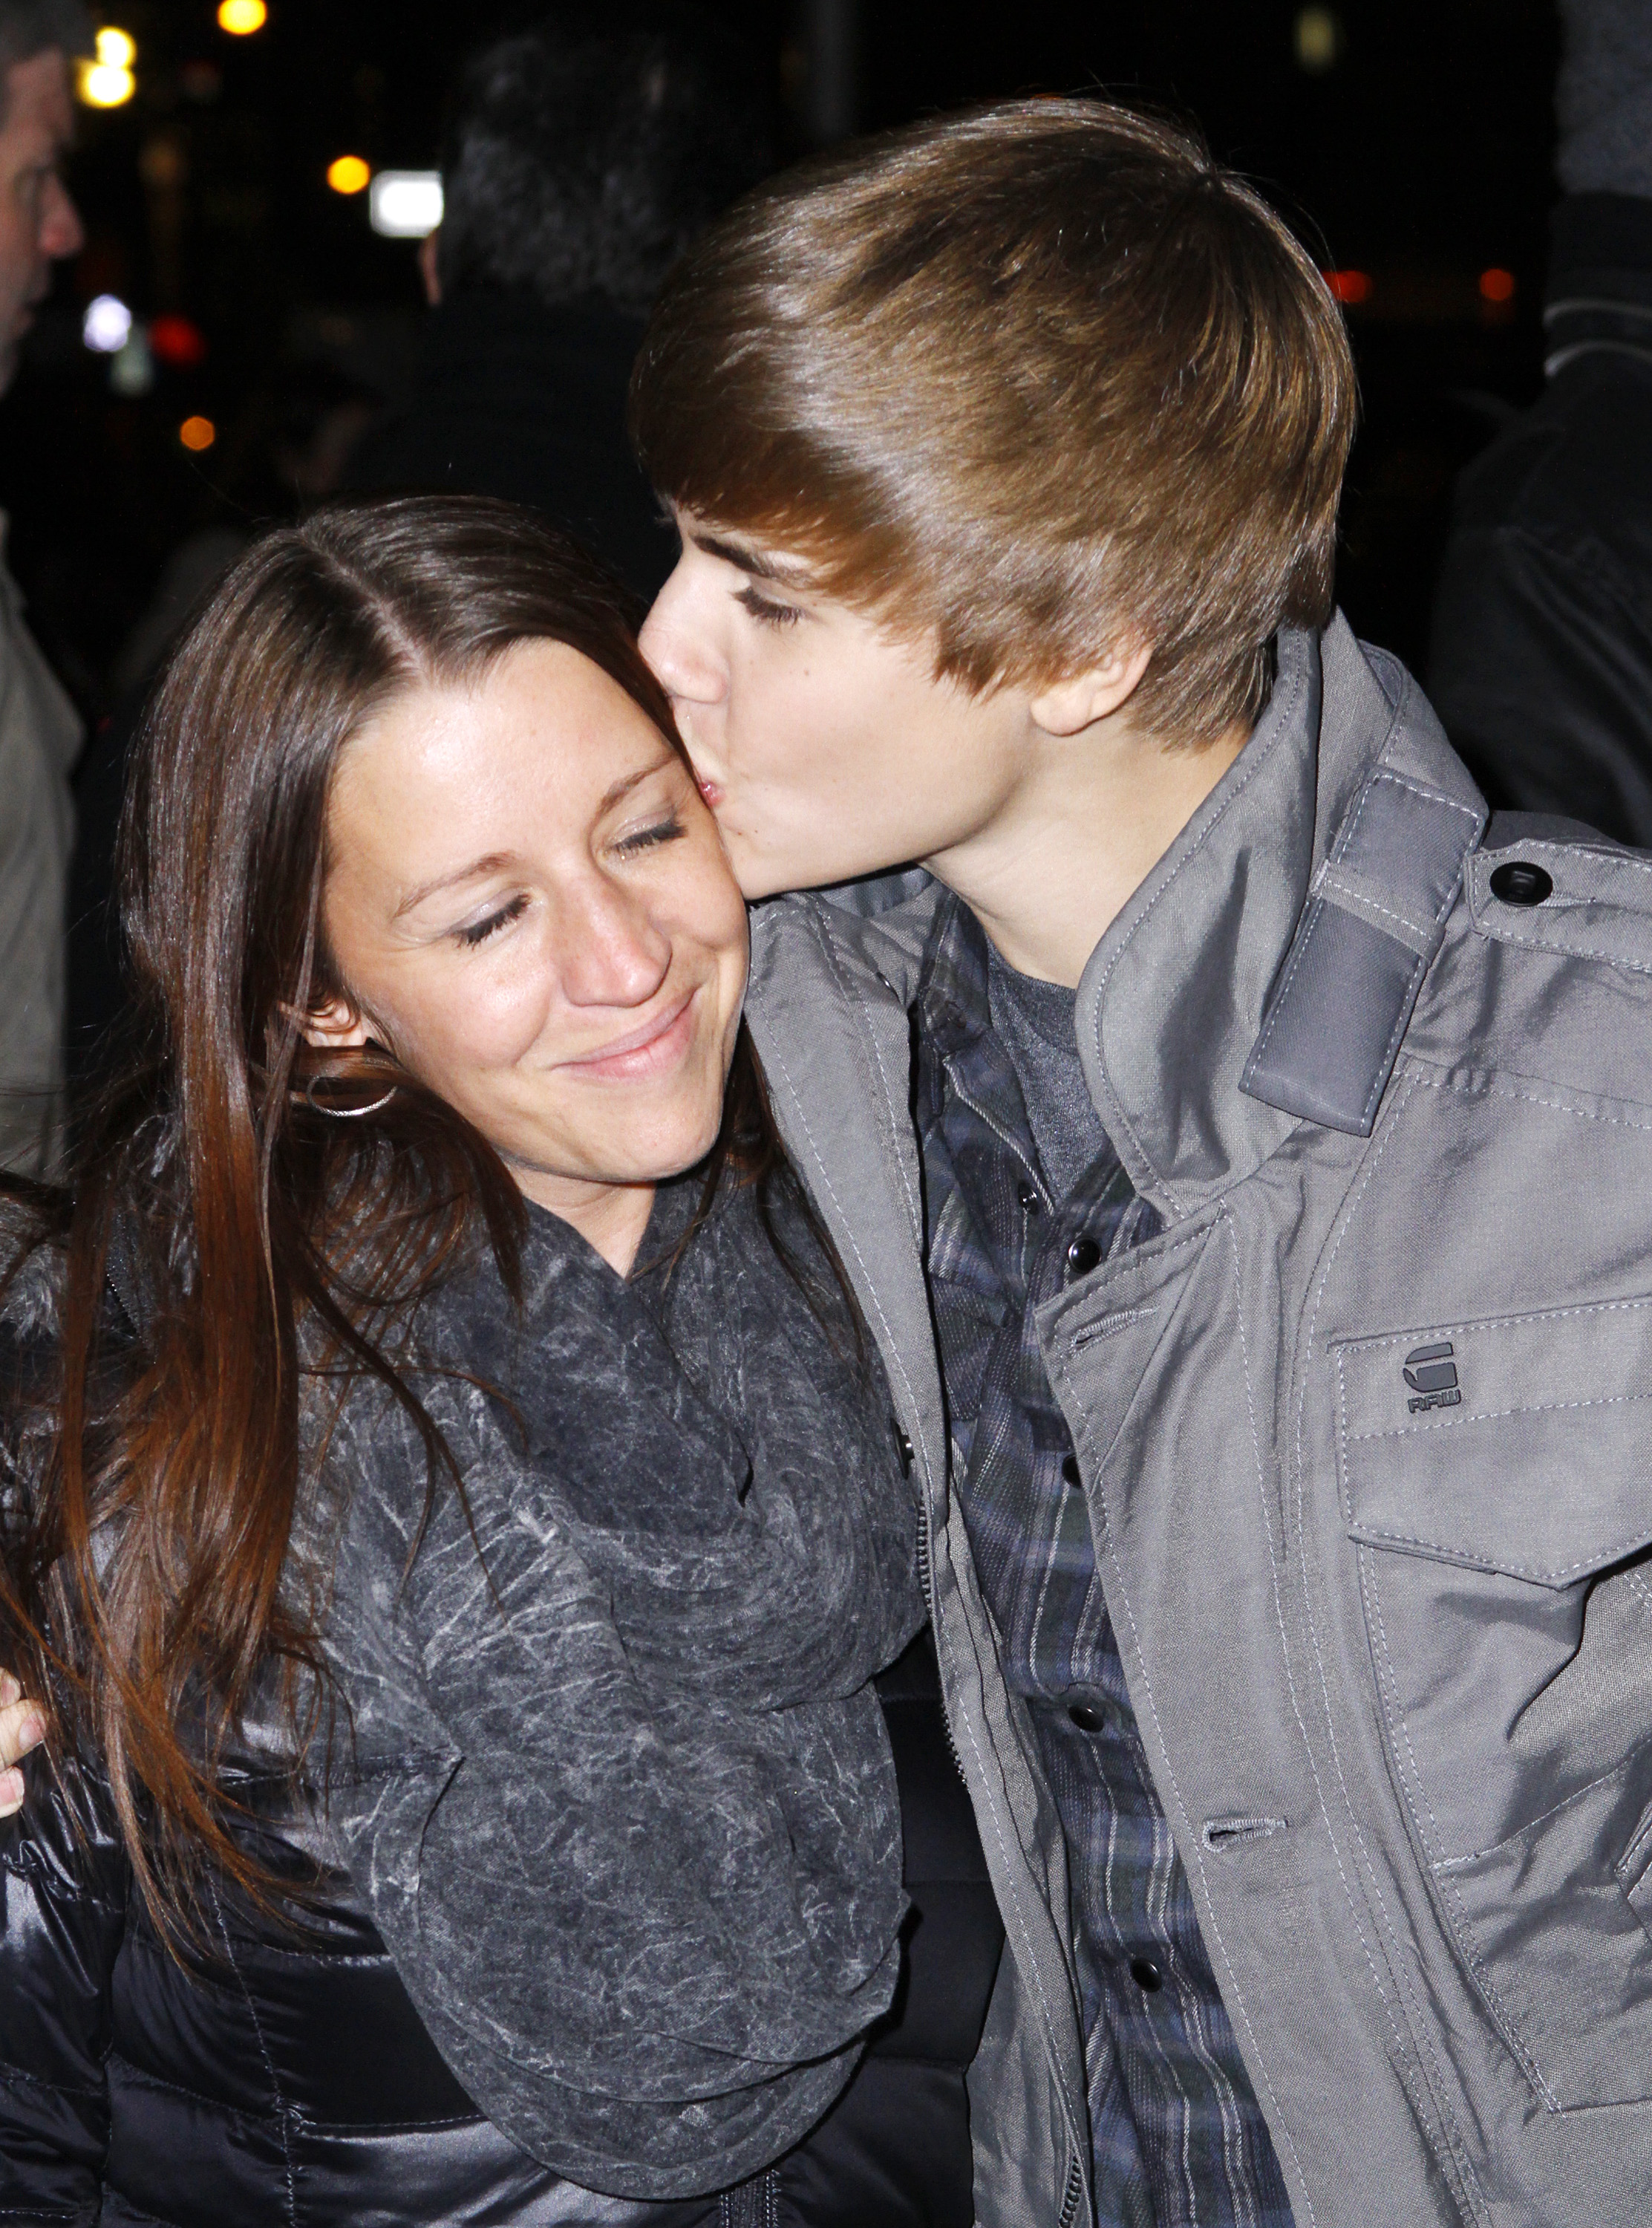 Justin Bieber and Pattie Mallette visit "The Late Show With David Letterman" at the Ed Sullivan Theater in New York City on January 31, 2011. | Source: Getty Images